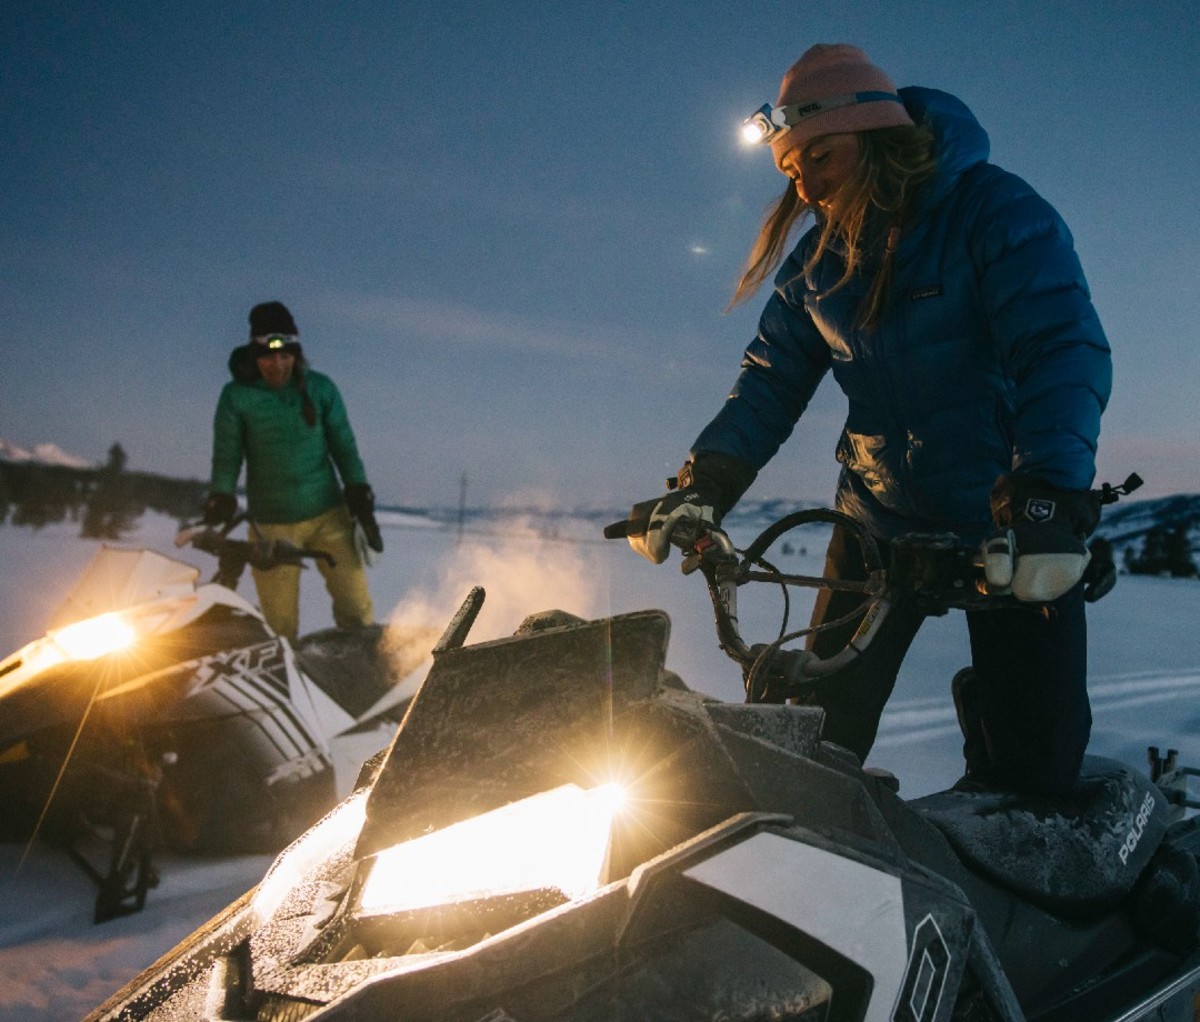 Snowmobilers on lit snowmobiles in the backcountry at night.